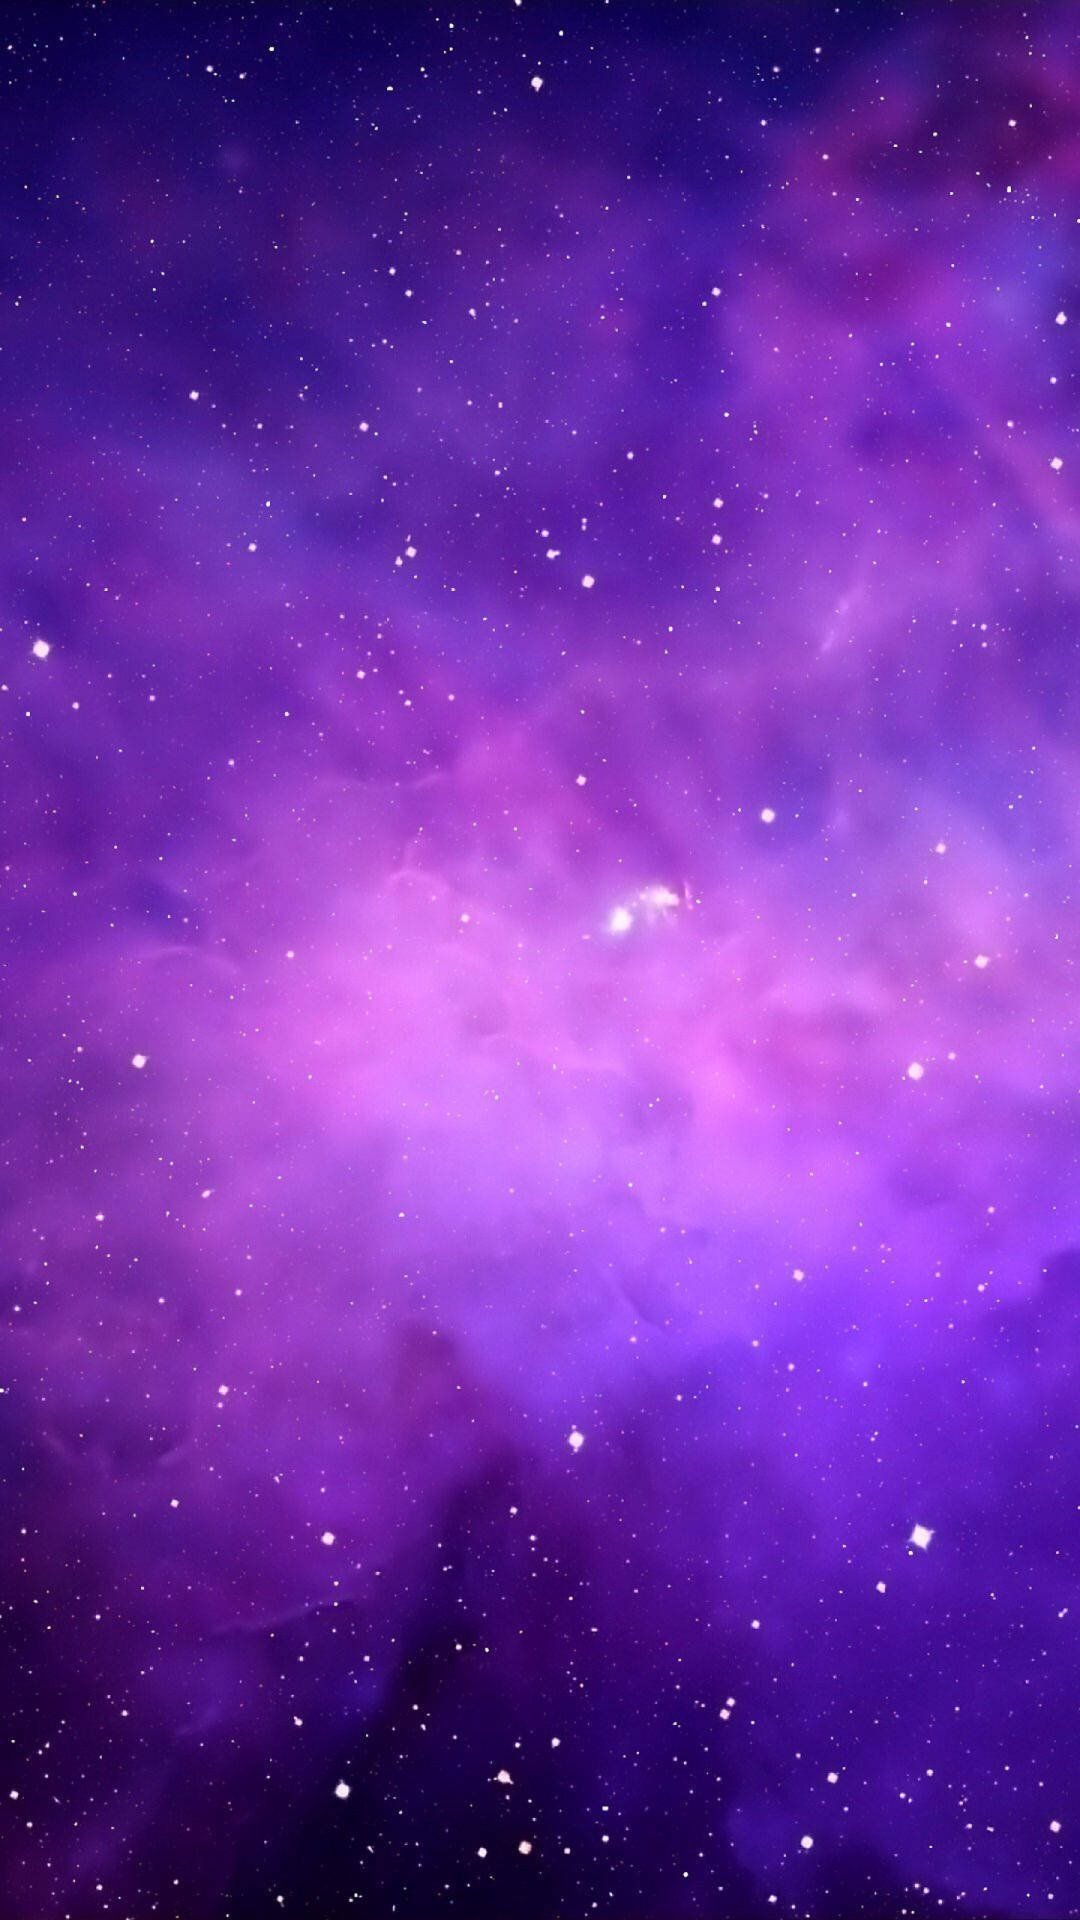 Delve Into the Bright and Majestic Purple Aesthetic Galaxy Wallpaper